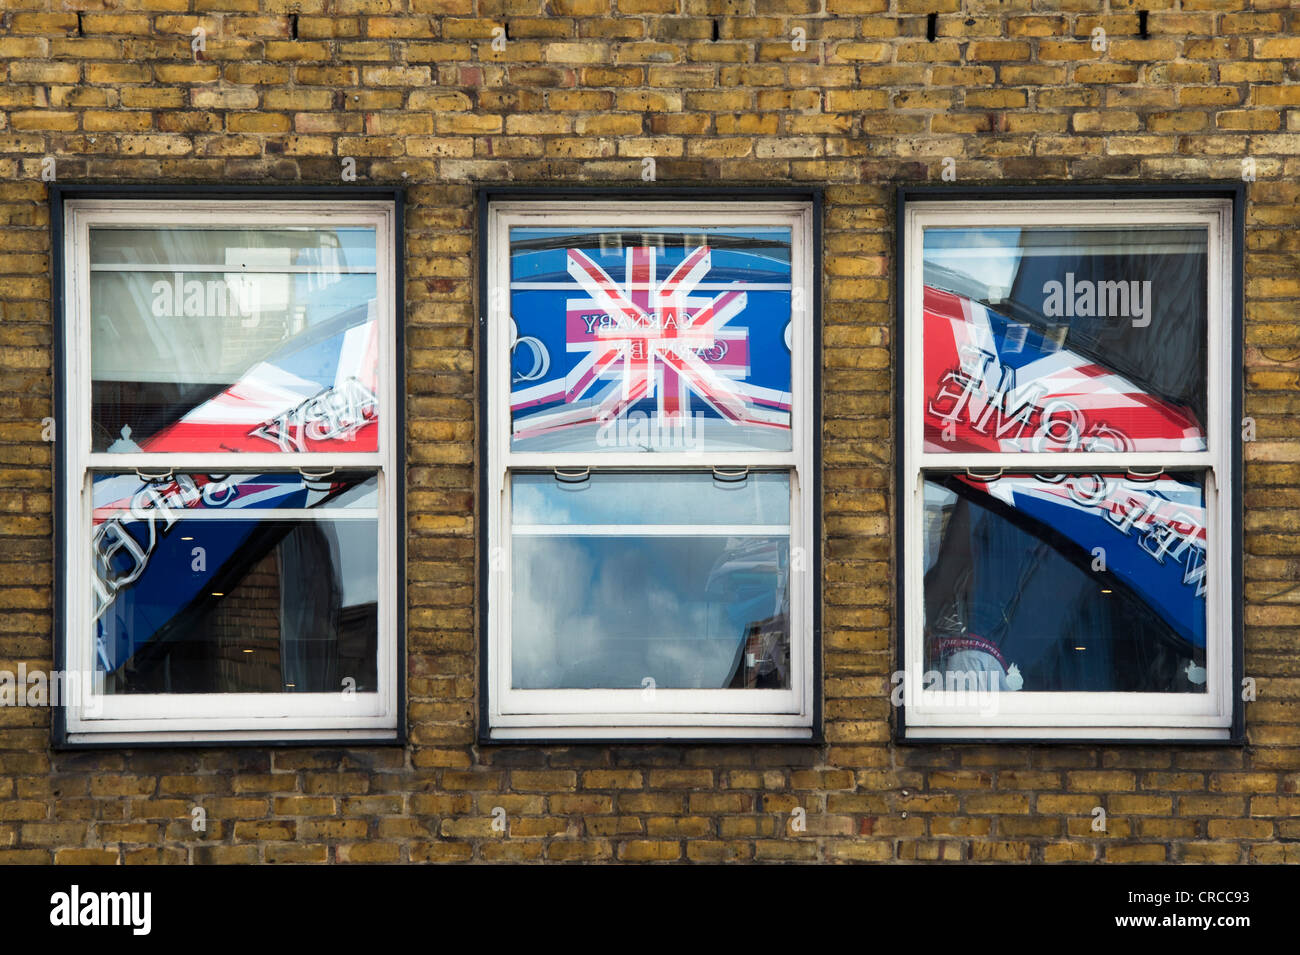 Carnaby street, union jack street sign reflected in 3 windows. London, England Stock Photo